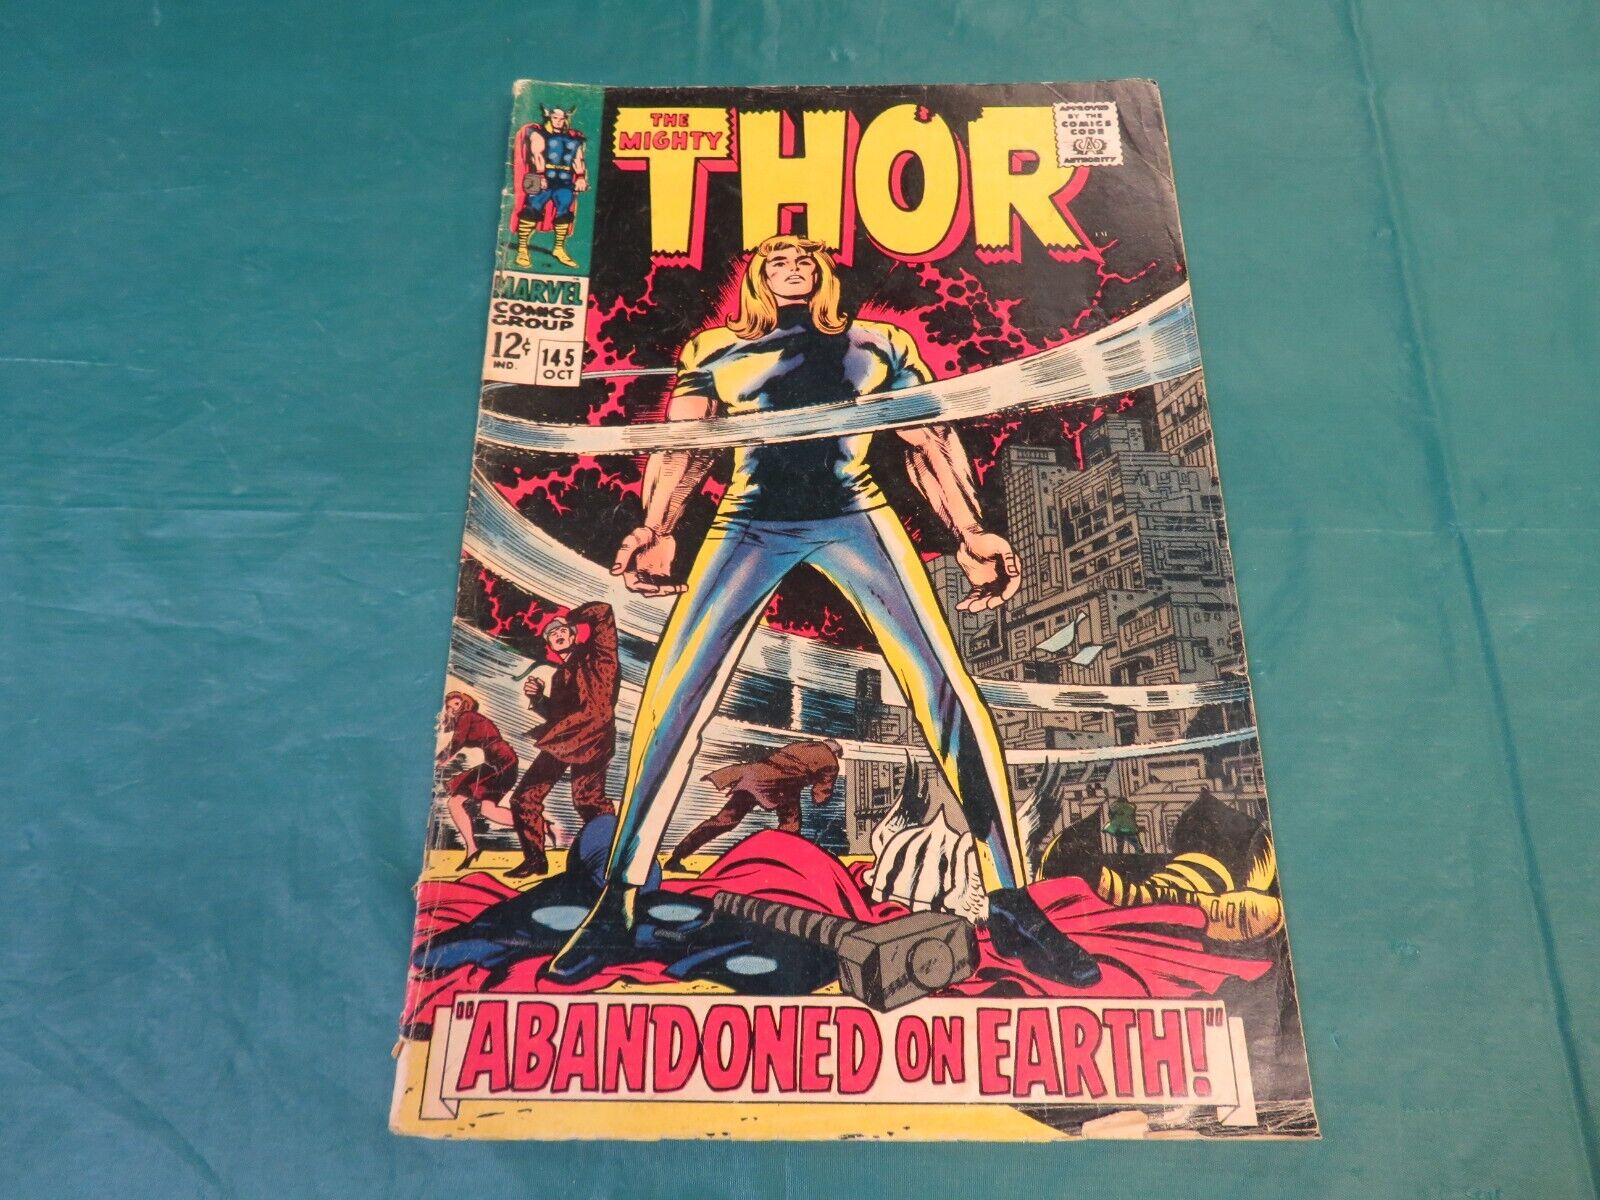 October 1967 Marvel Comic: The Mighty Thor #145 - Abandoned On Earth